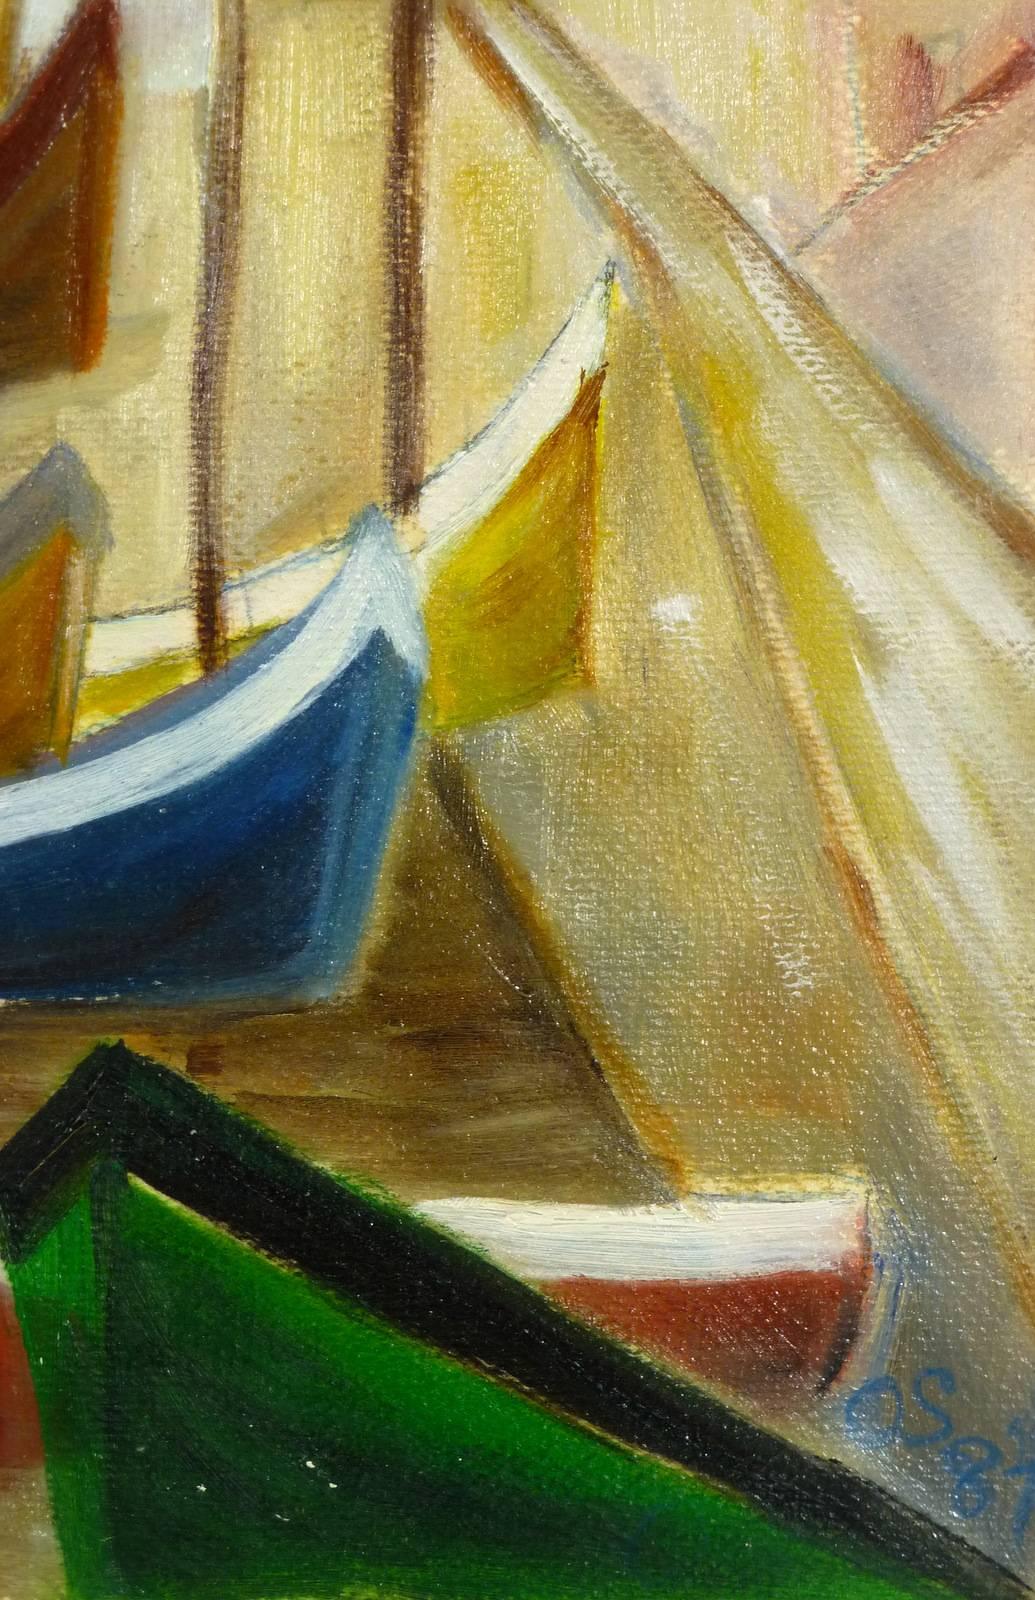 Boats at Dock - Painting by Unknown